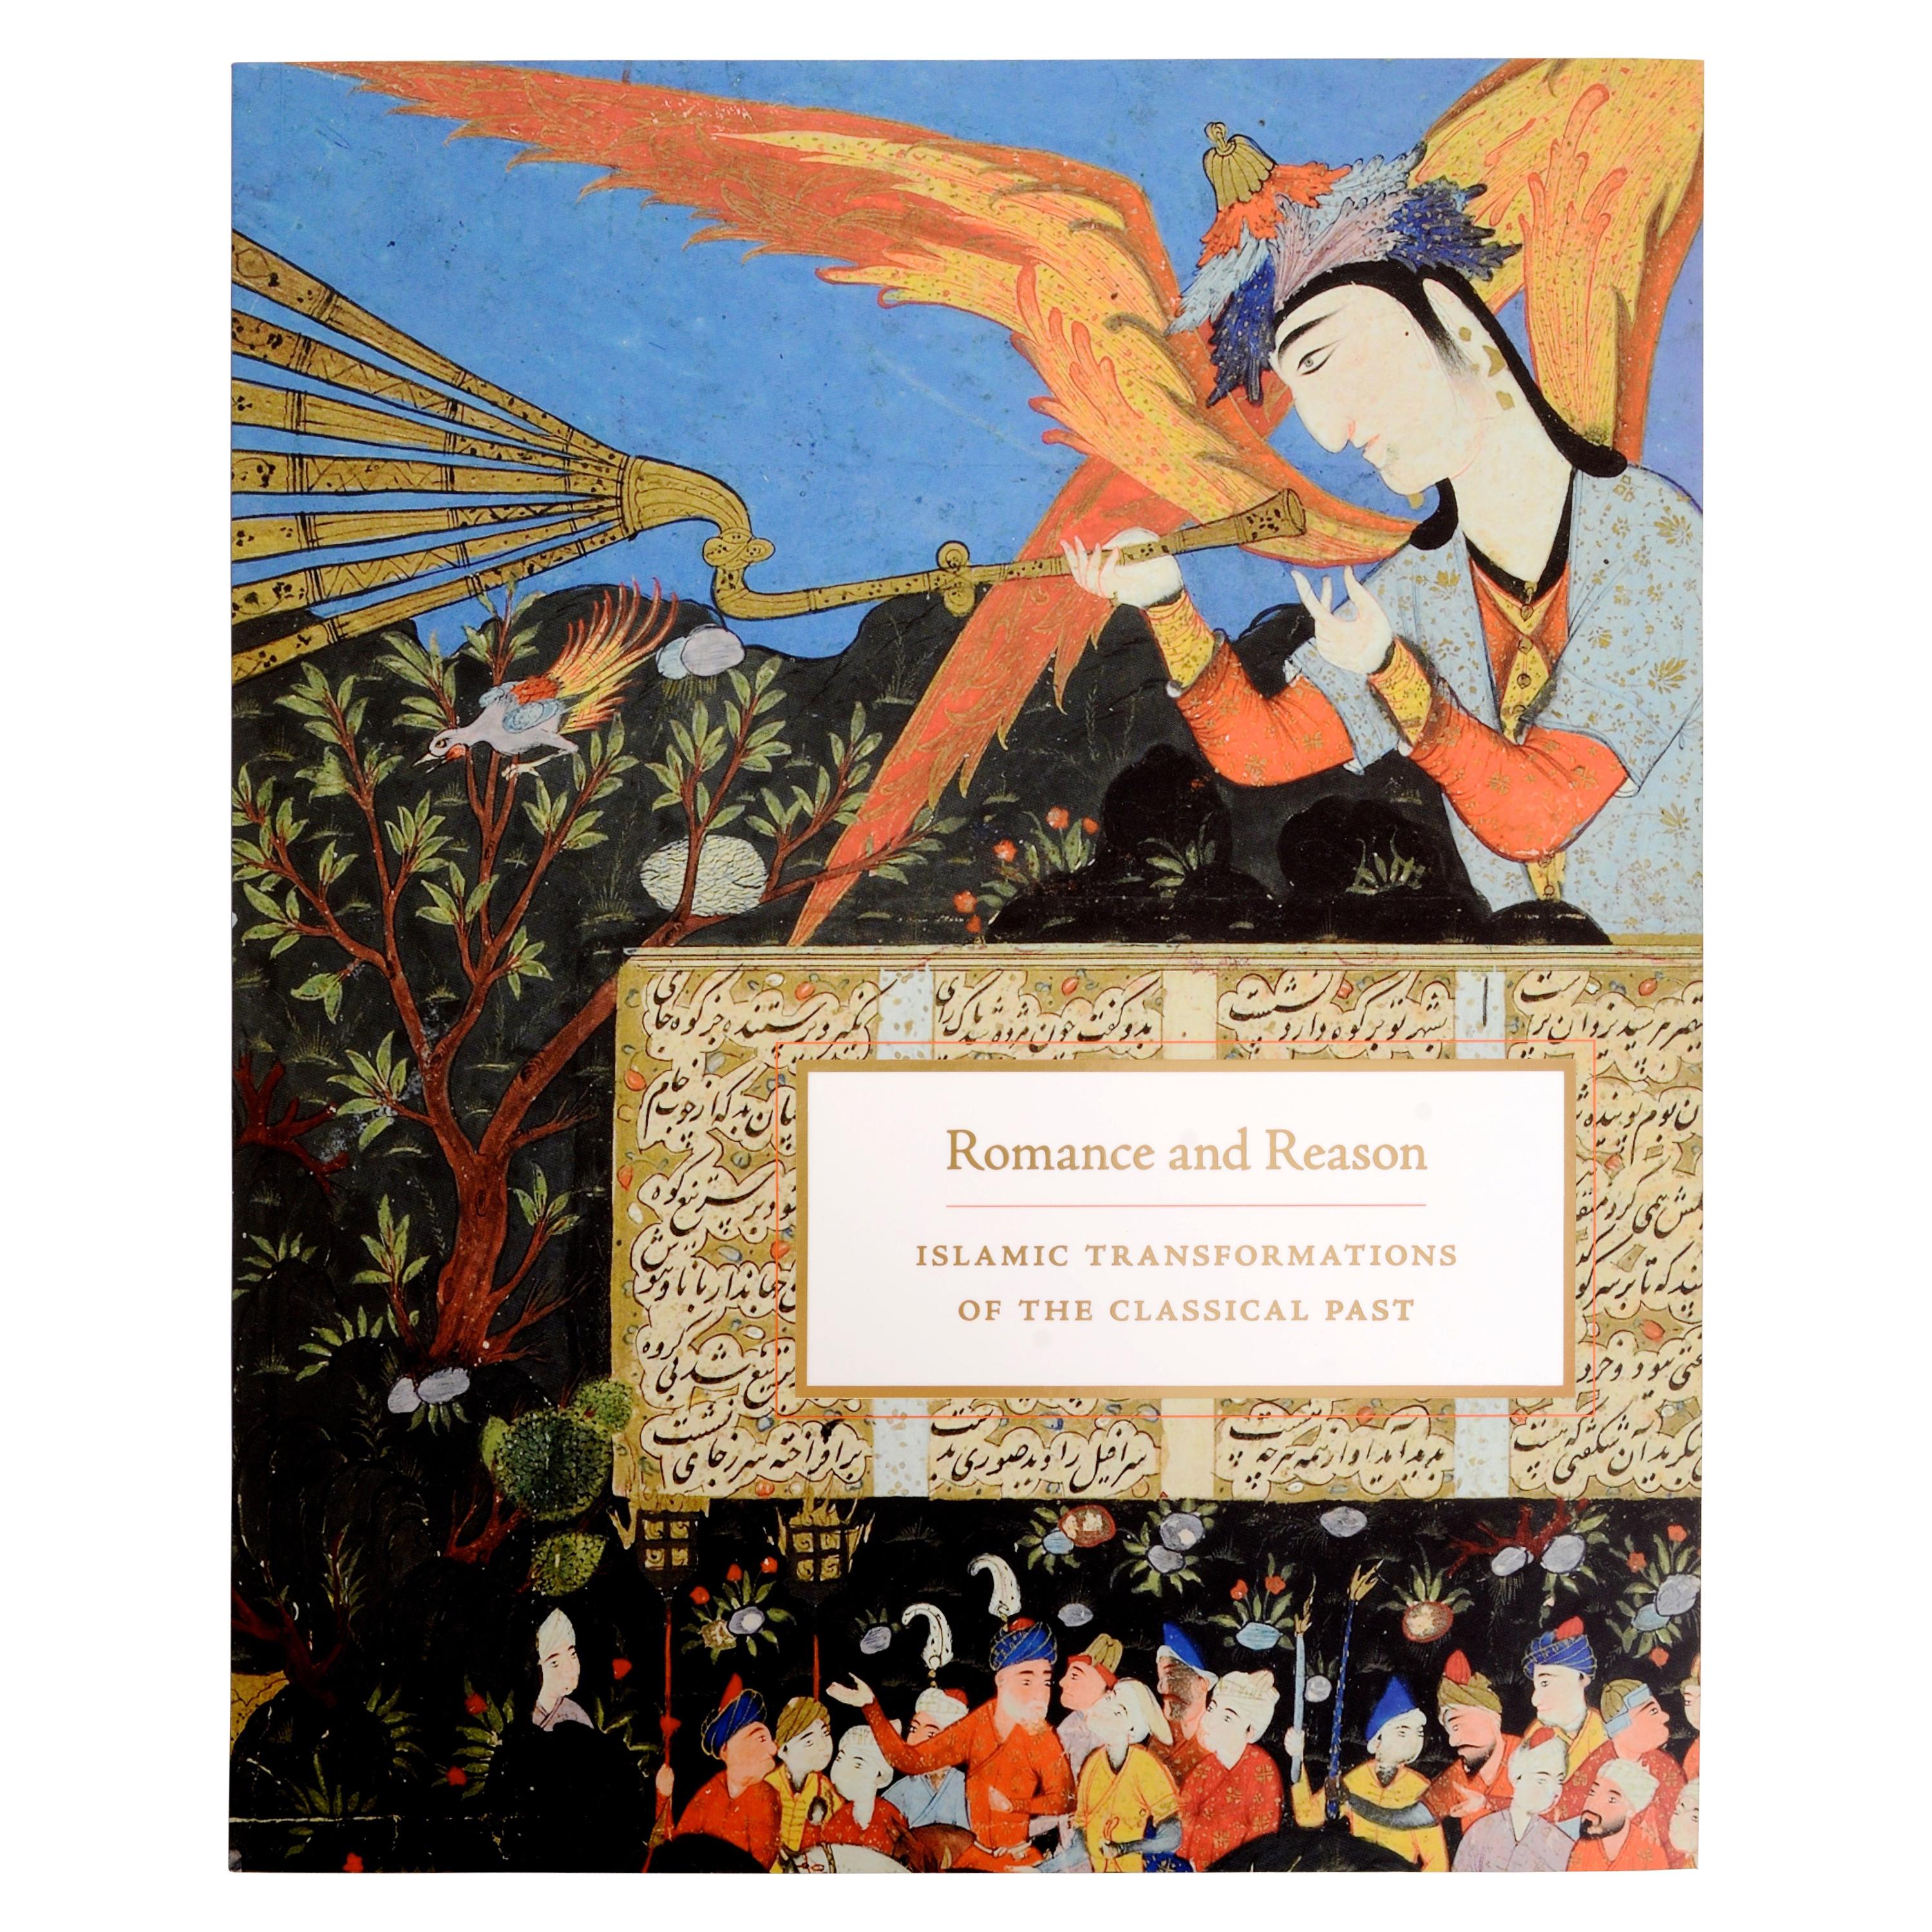 Romance and Reason Islamic Transformations of the Classical Past, 1st Ed